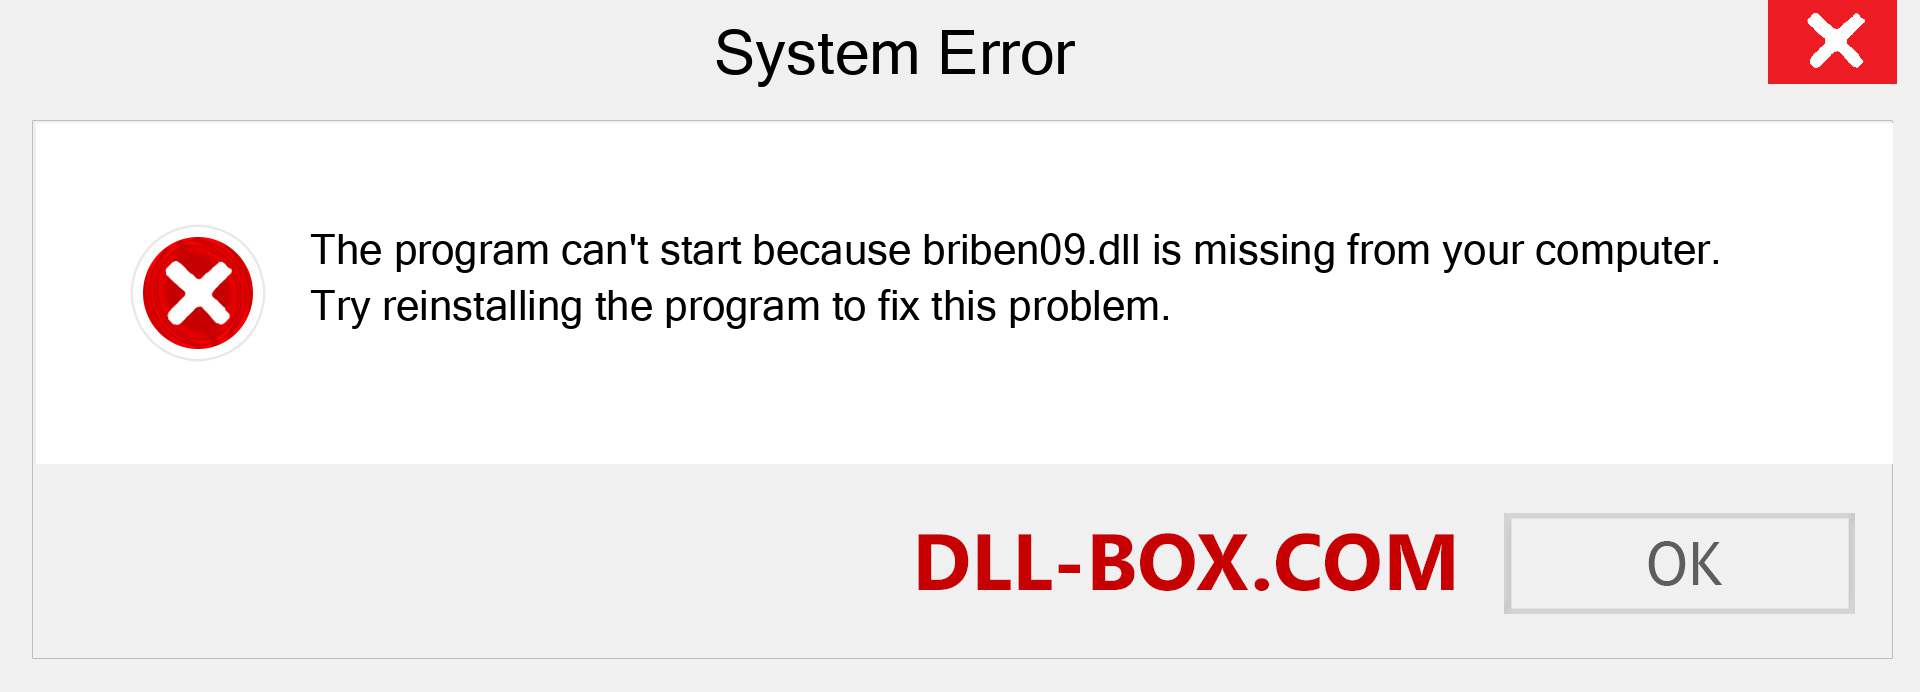  briben09.dll file is missing?. Download for Windows 7, 8, 10 - Fix  briben09 dll Missing Error on Windows, photos, images